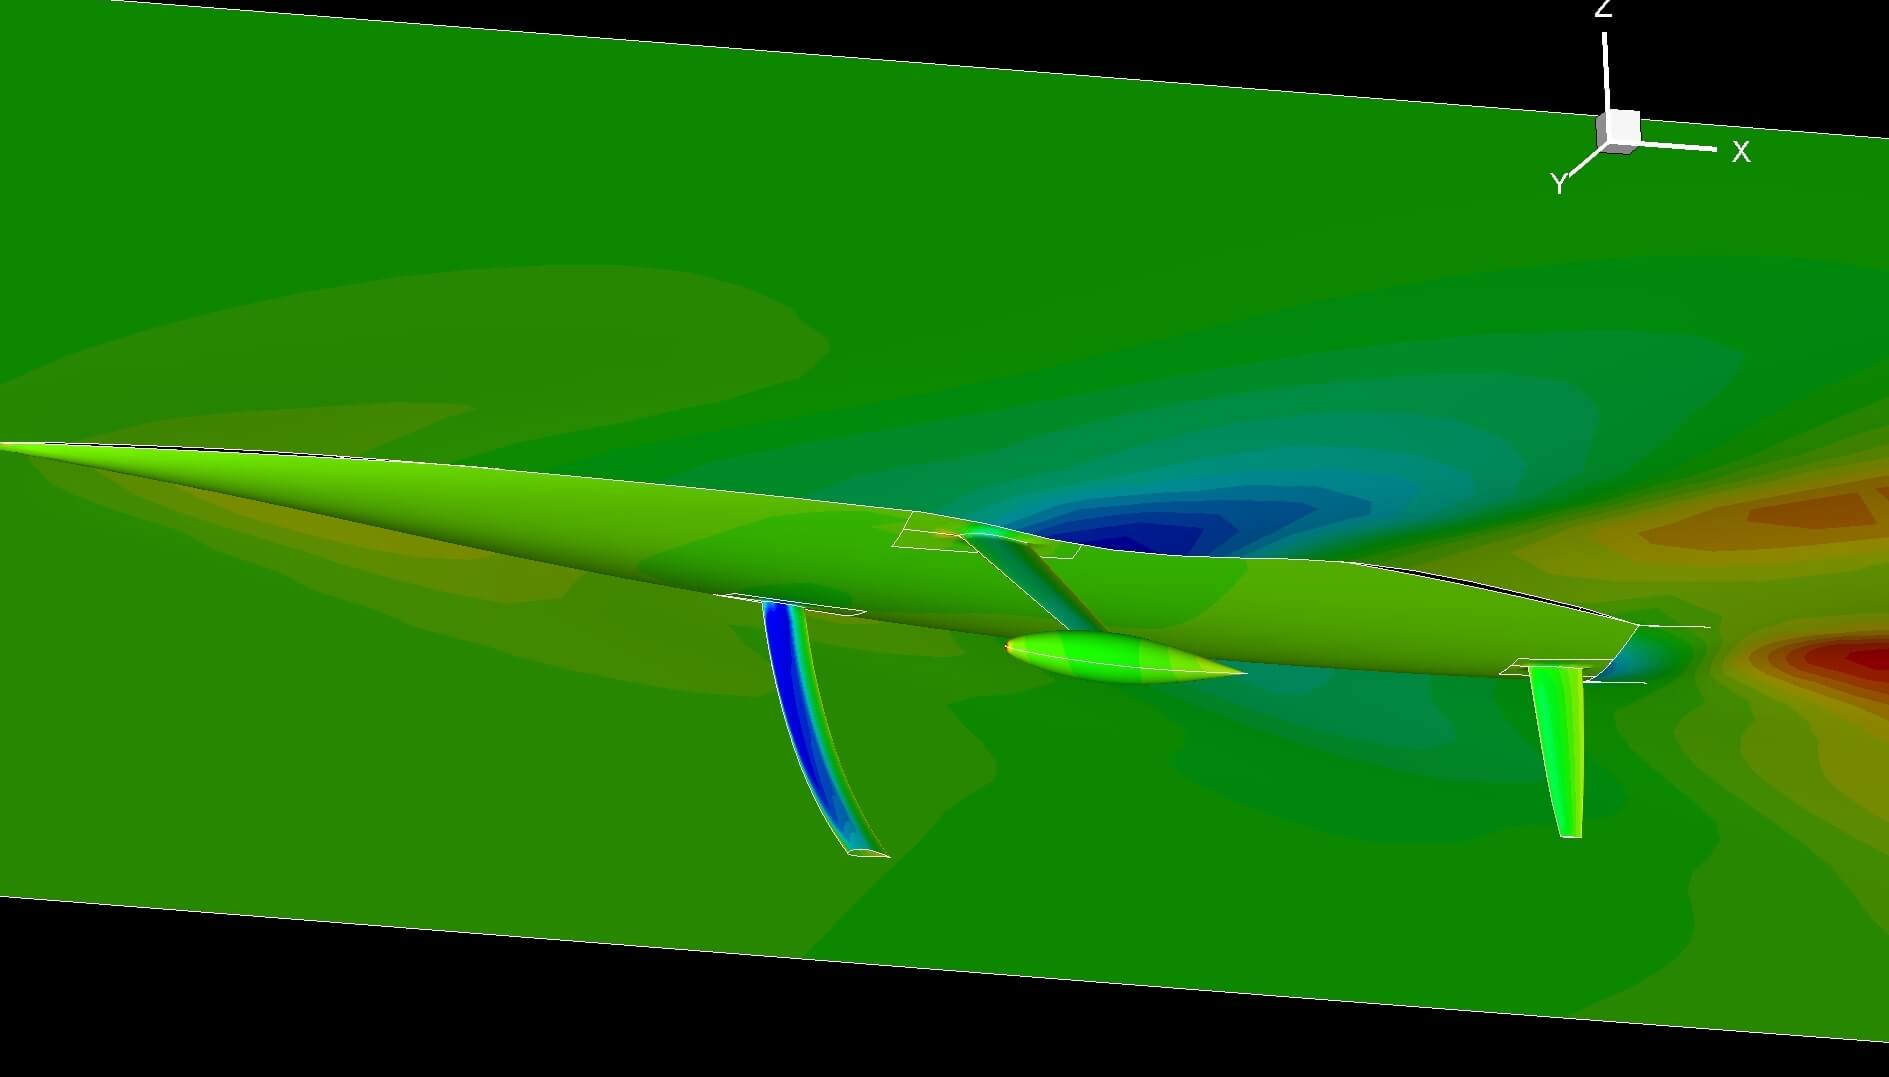 This a screen grab image of CFD (computational fluid dynamics) analysis being undertaken on a pre-lifting foils Owen Clarke IMOCA Open 60 design.